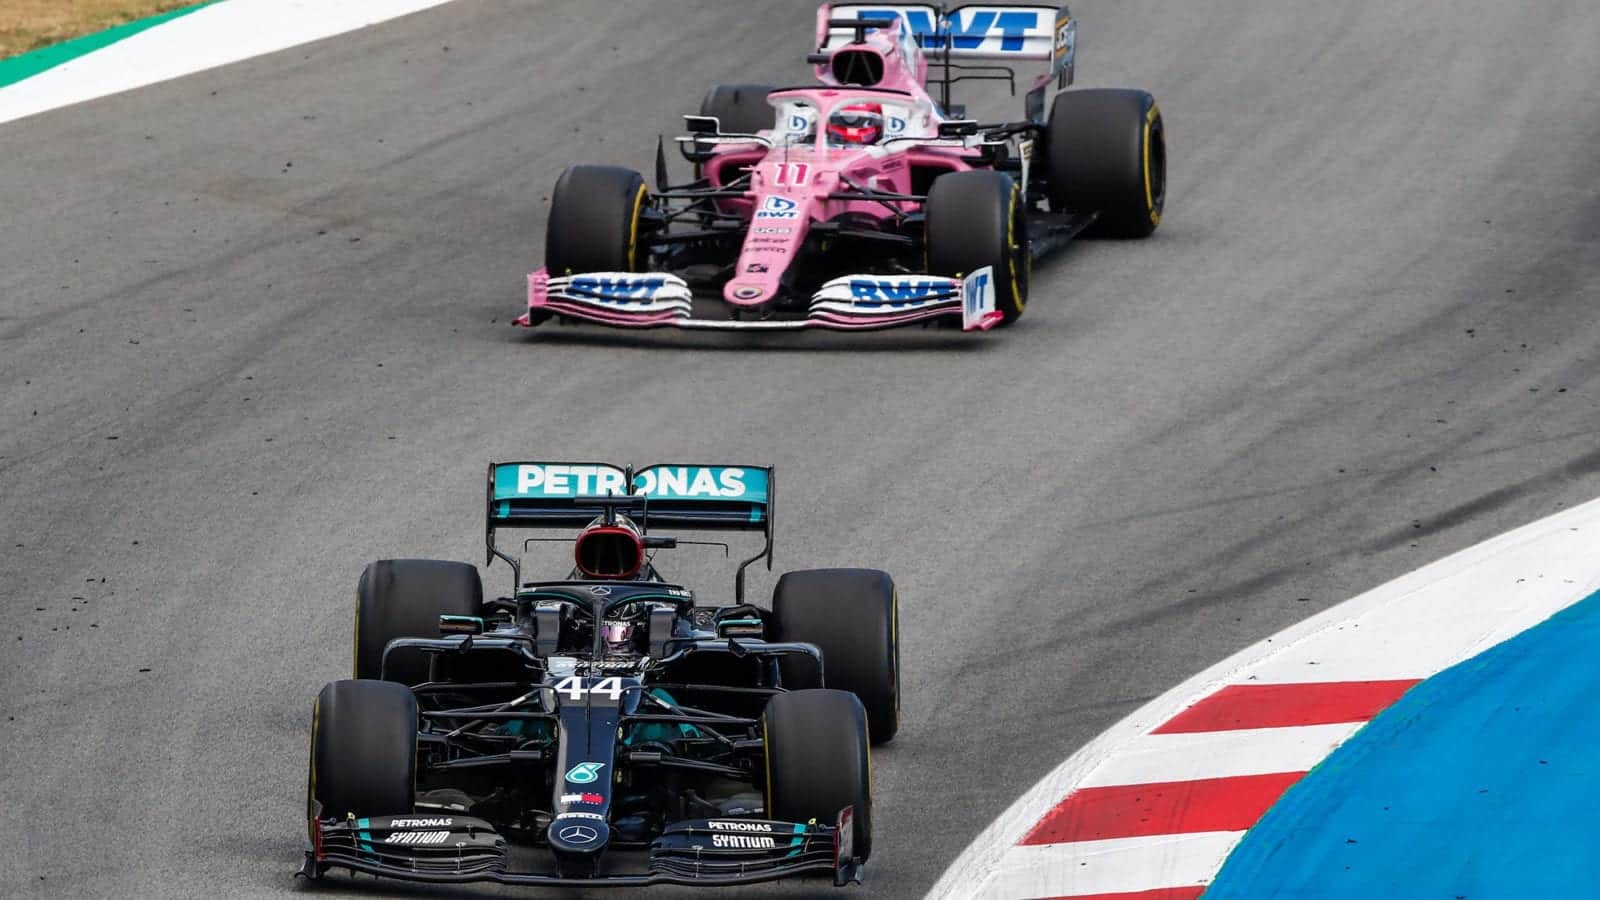 Lewis Hamilton in the Mercedes leads the Racing Point of Sergio Perez in 2020